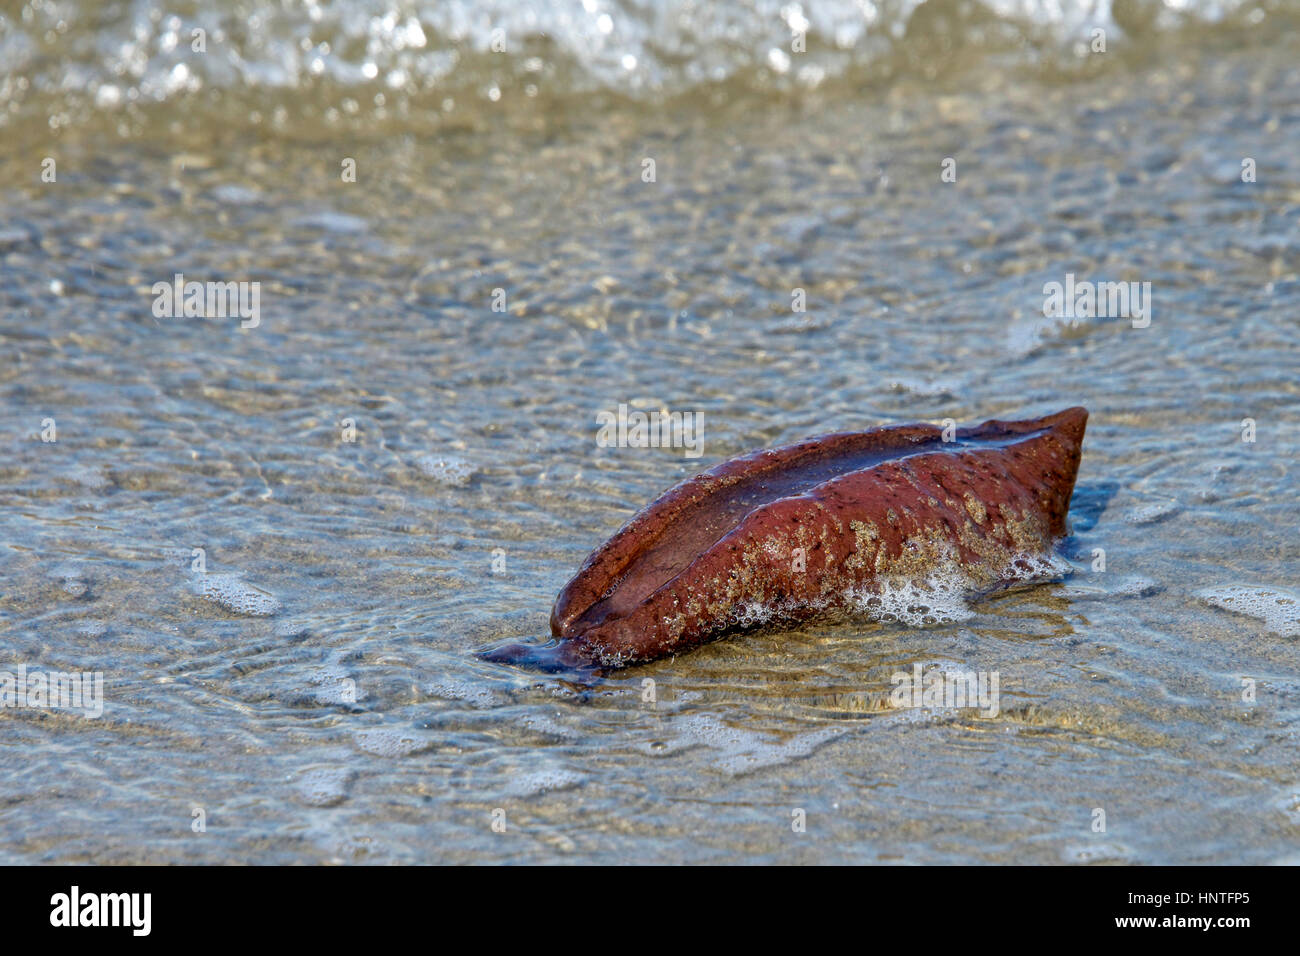 The life cycle of a sea hare is about one year. After they lay eggs, they die. So many washed up on the shores of San Francisco this year, people call Stock Photo